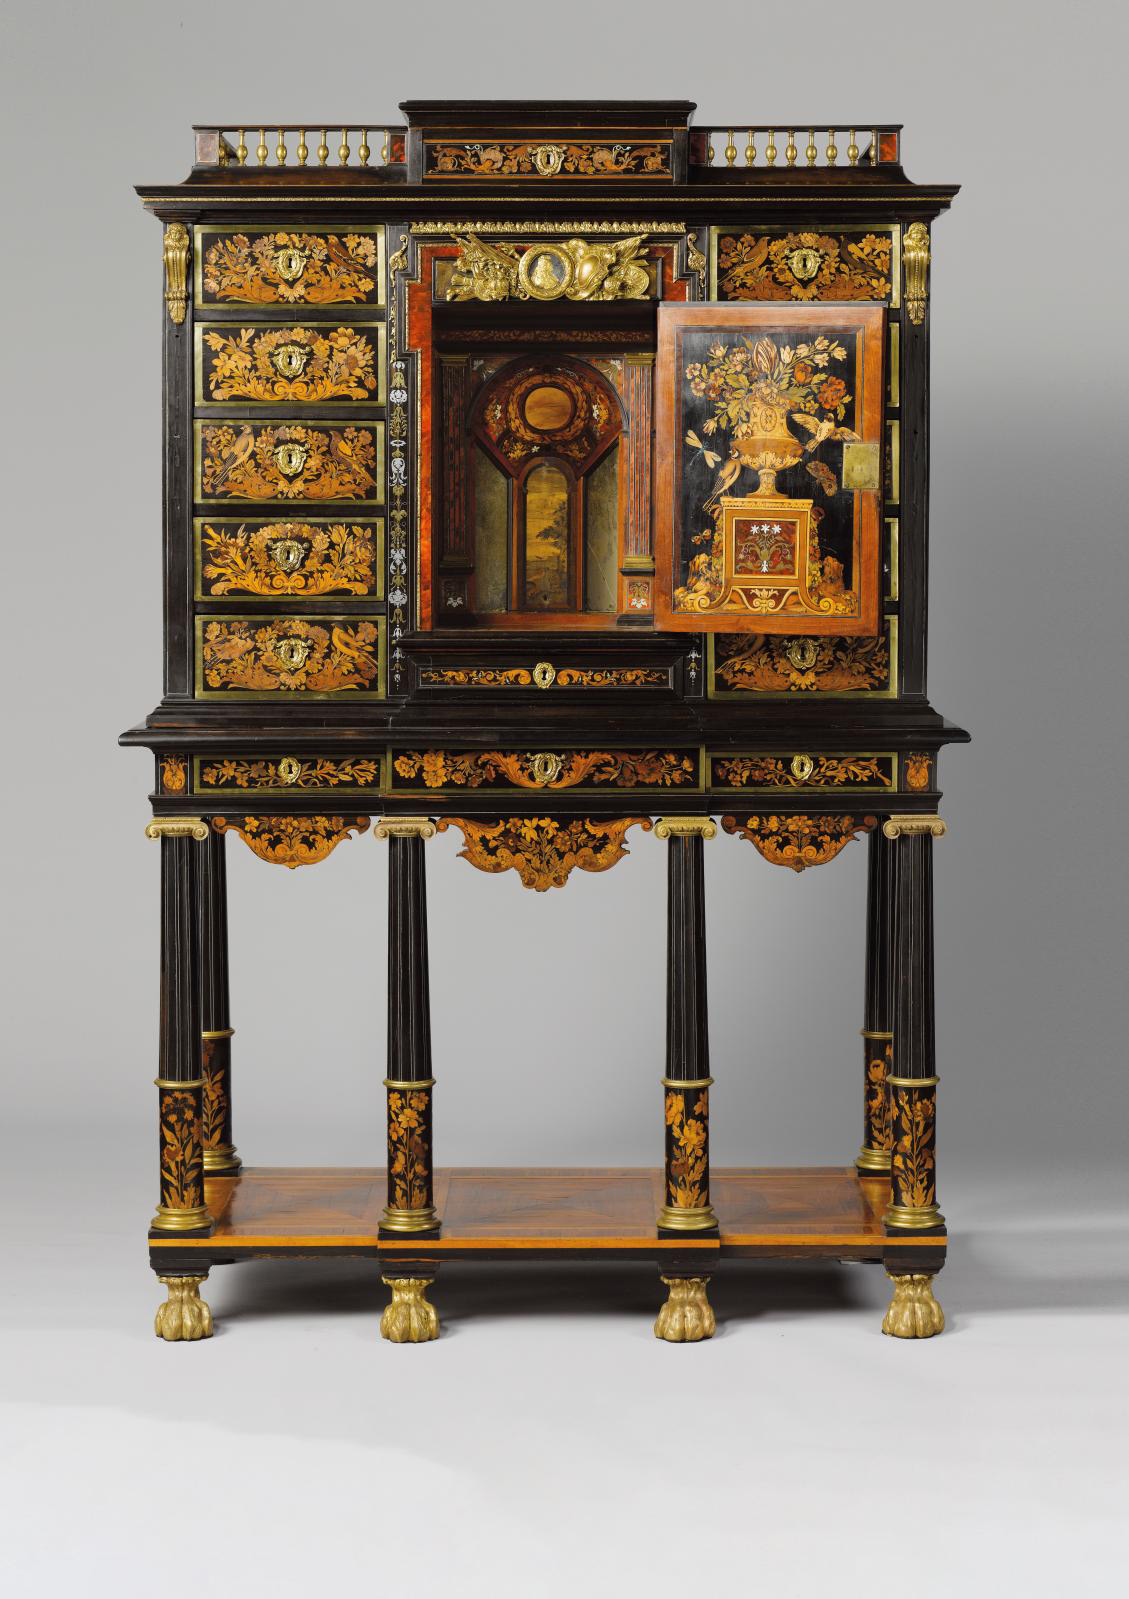 Attributed to Renaud Gaudron. (c. 1653-1727). Cabinet (condition after restoration in 1993), c.1685, oak, ebony, marquetry in veneering wo